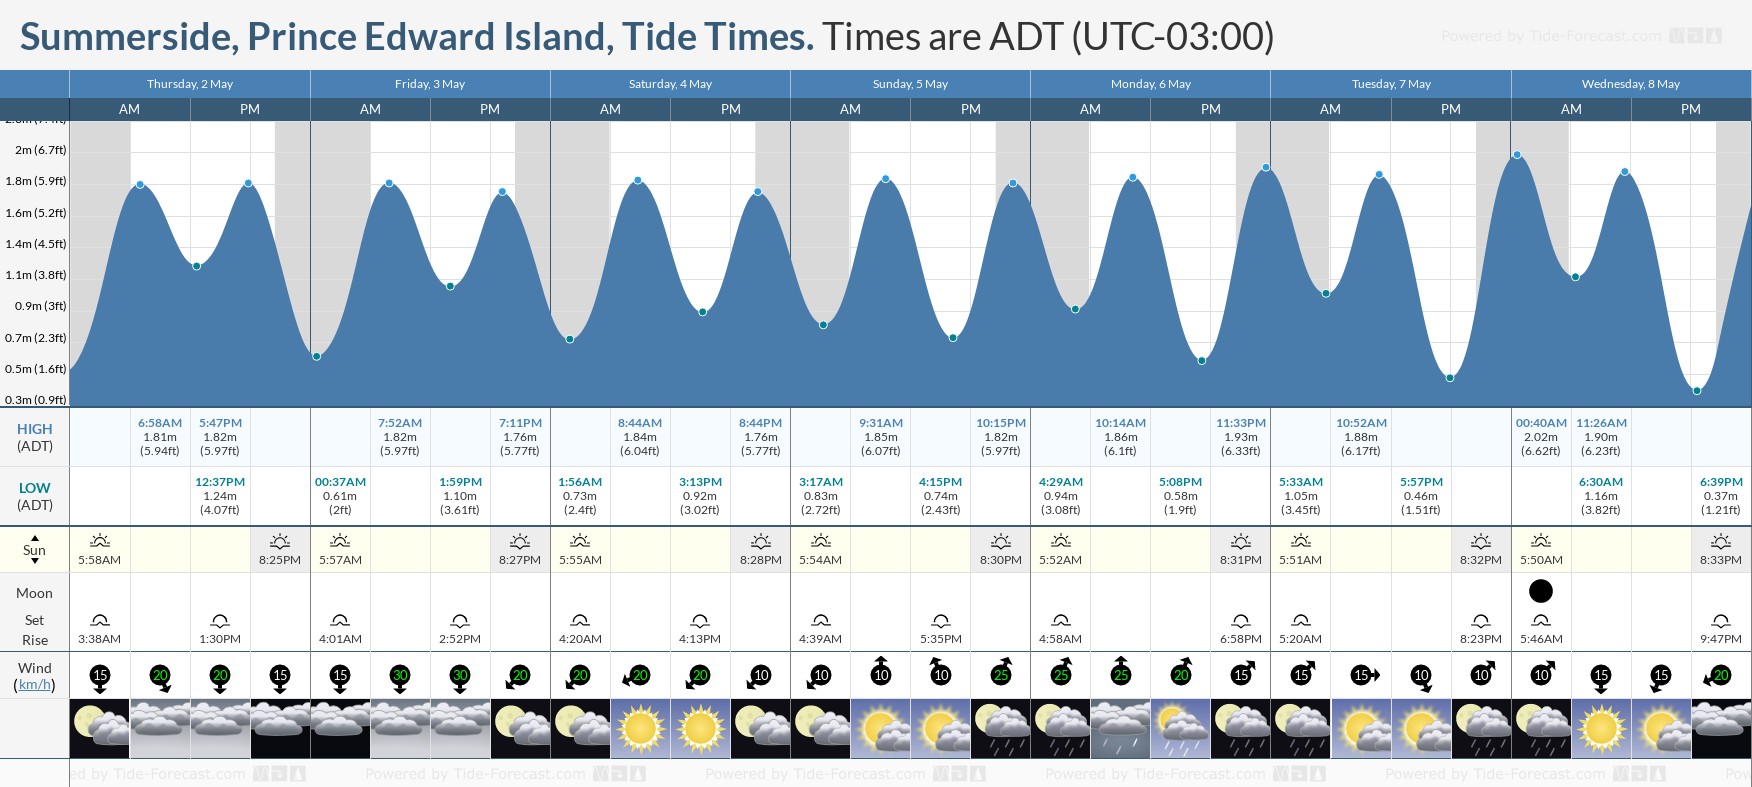 Summerside, Prince Edward Island Tide Chart including high and low tide tide times for the next 7 days